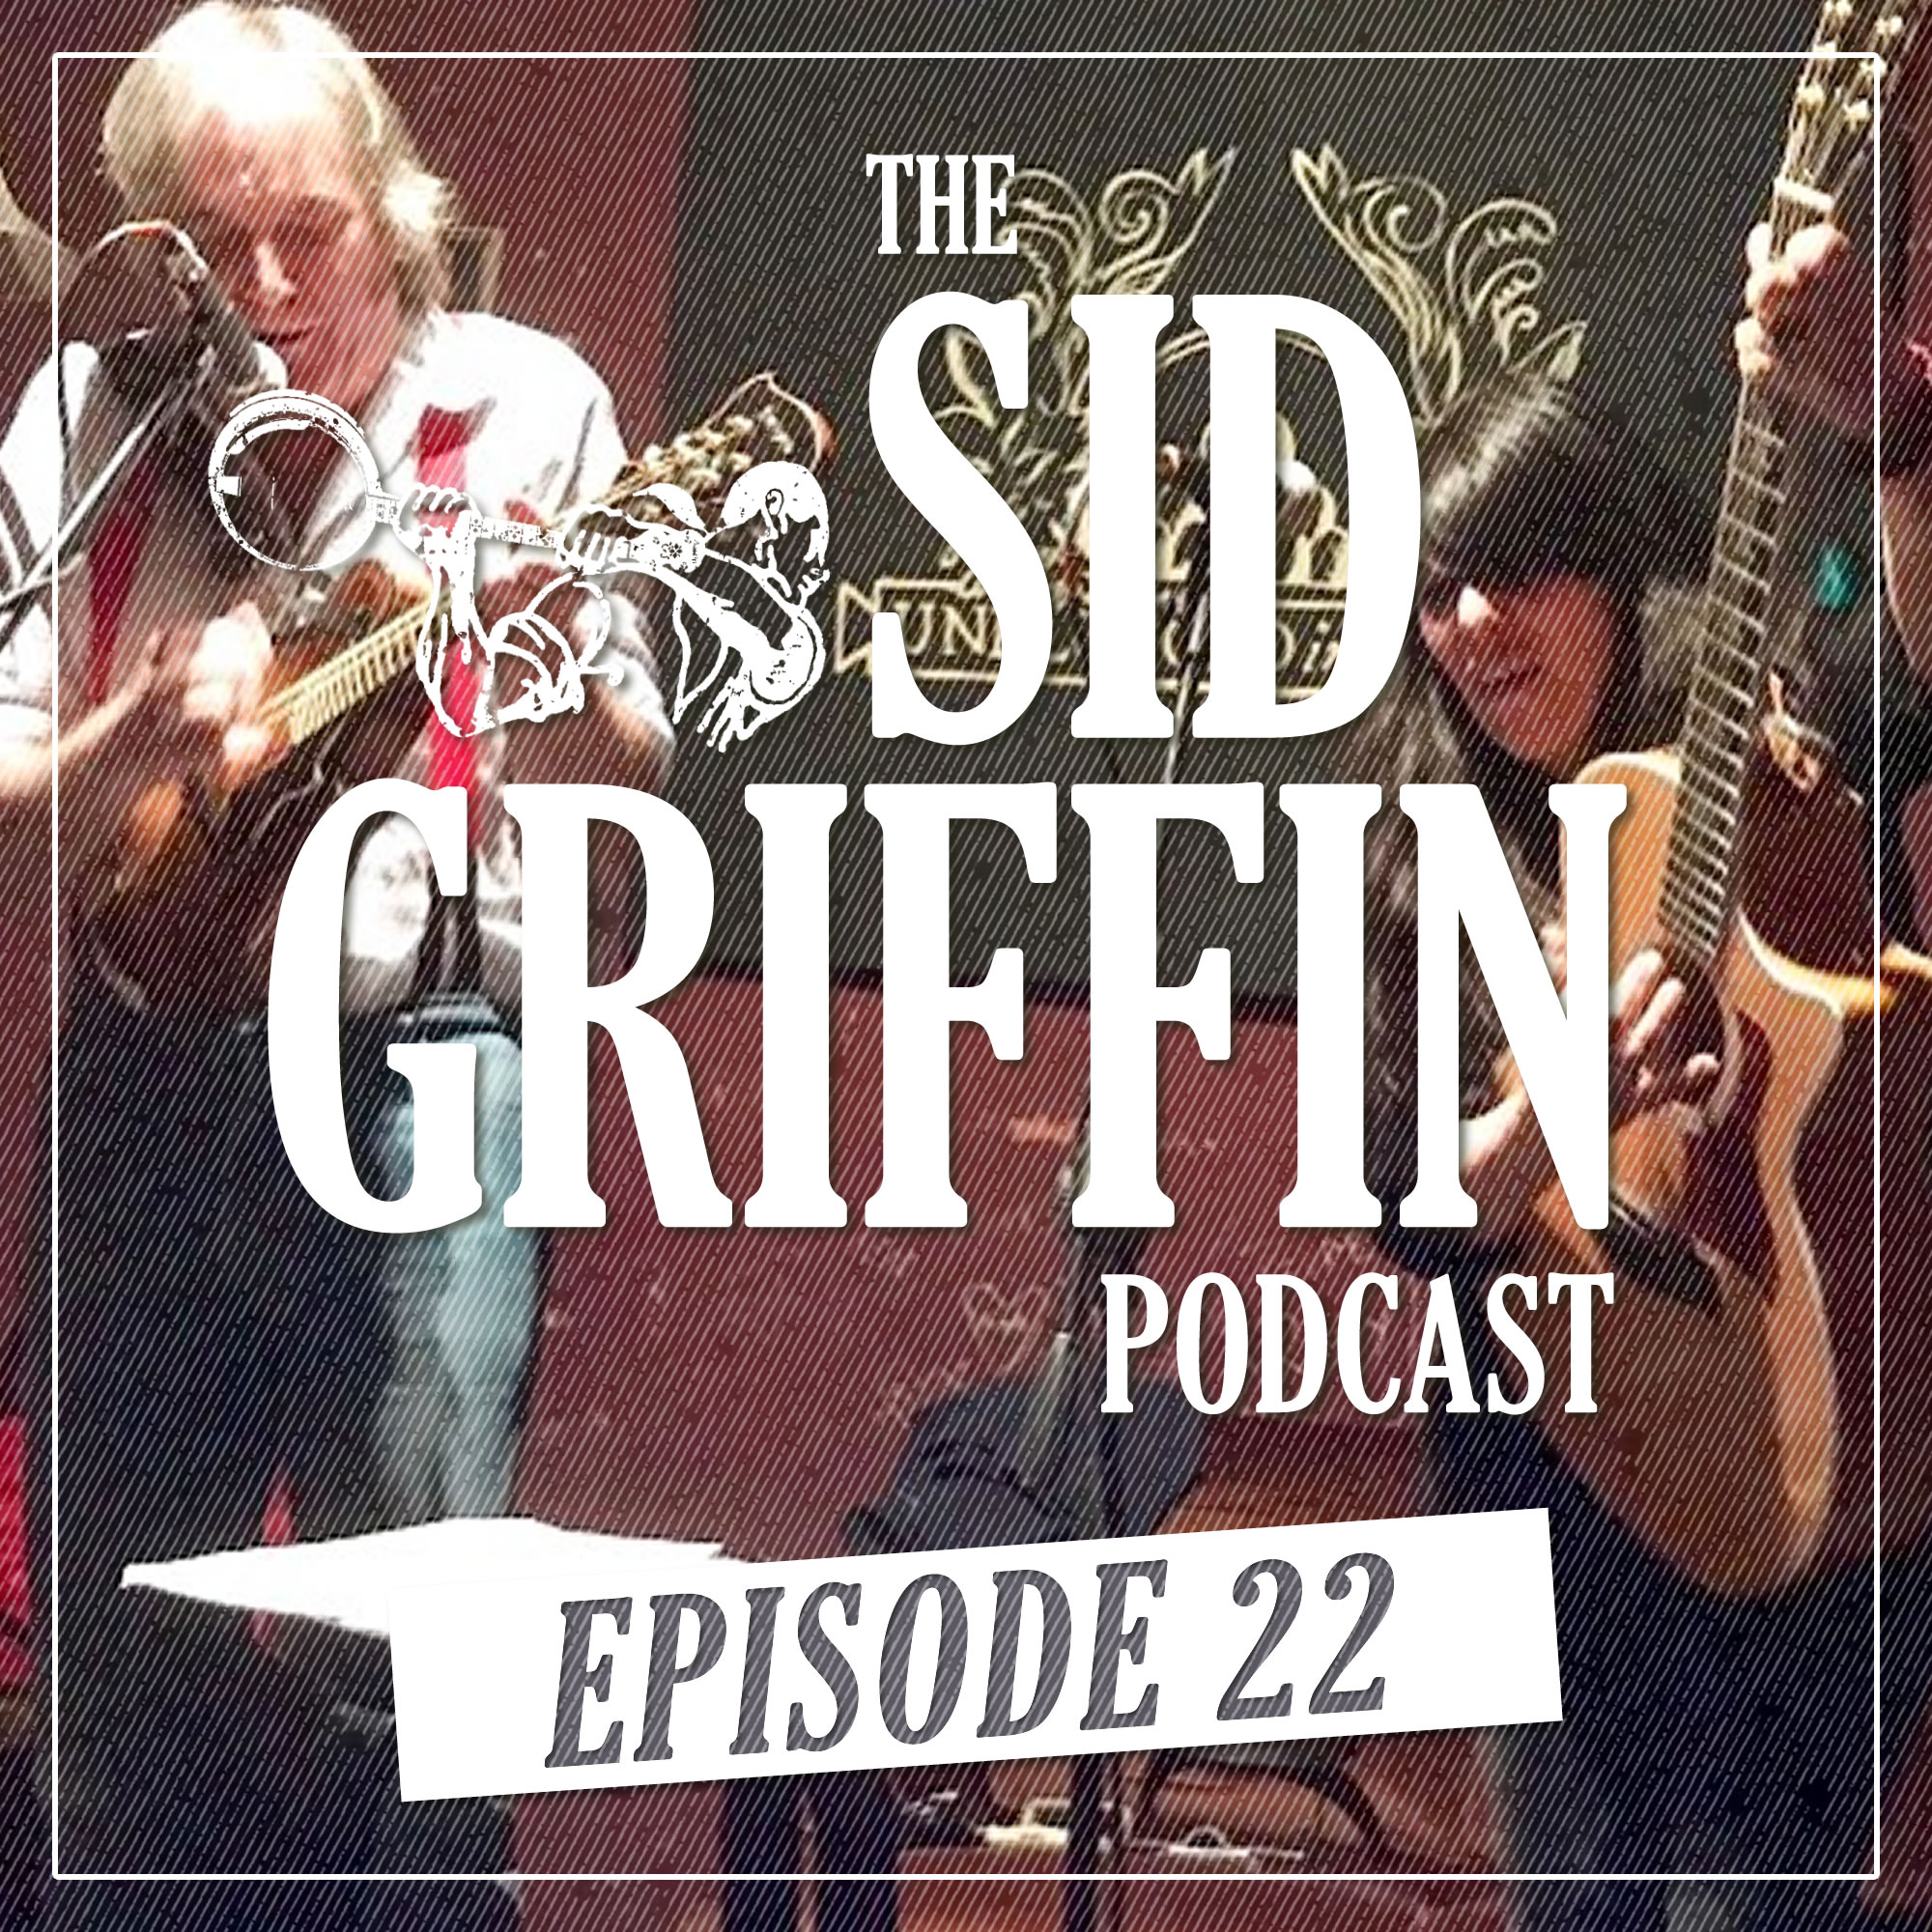  The Sid Griffin Podcast - Call All Coal Porters - Show 22